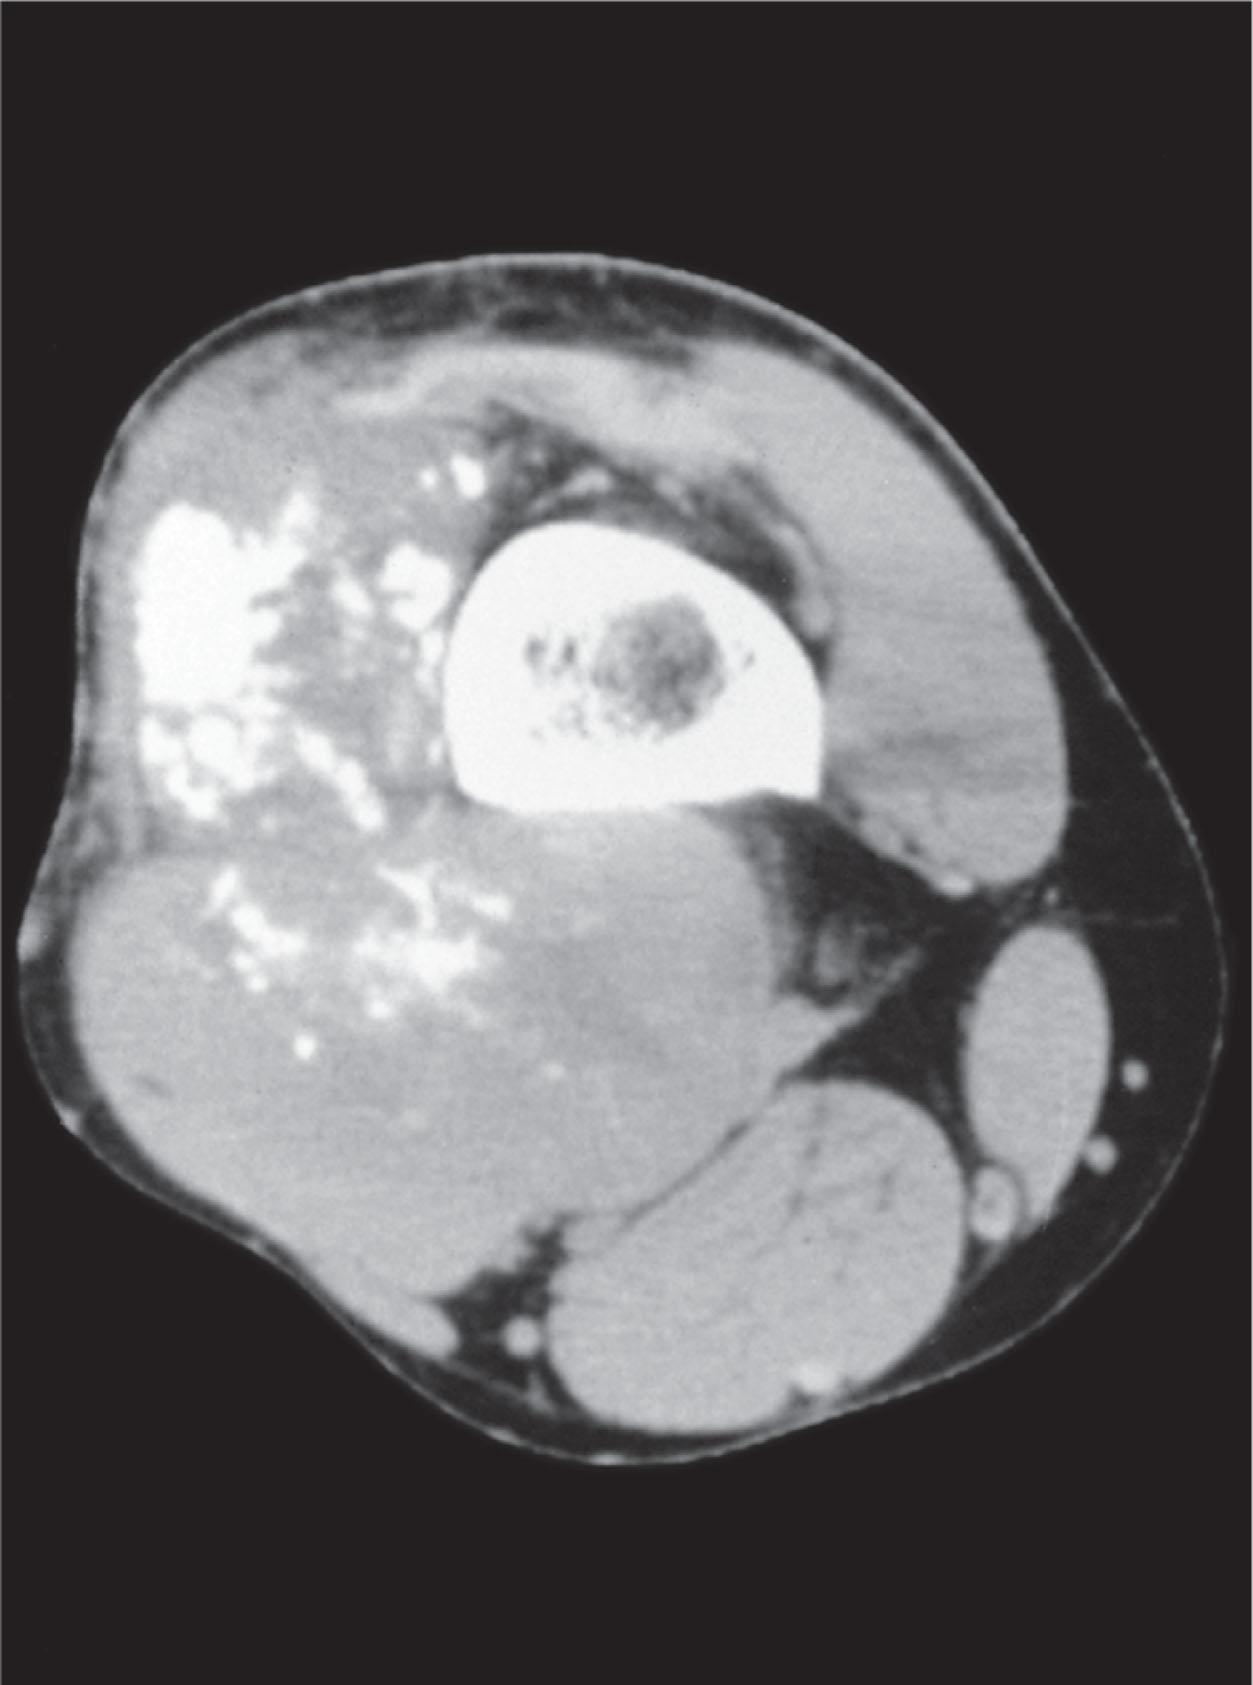 Fig. 215.2, Synovial sarcoma. Axial computed tomography scan demonstrating a soft tissue mass lateral and posterior to the femur containing calcifications.